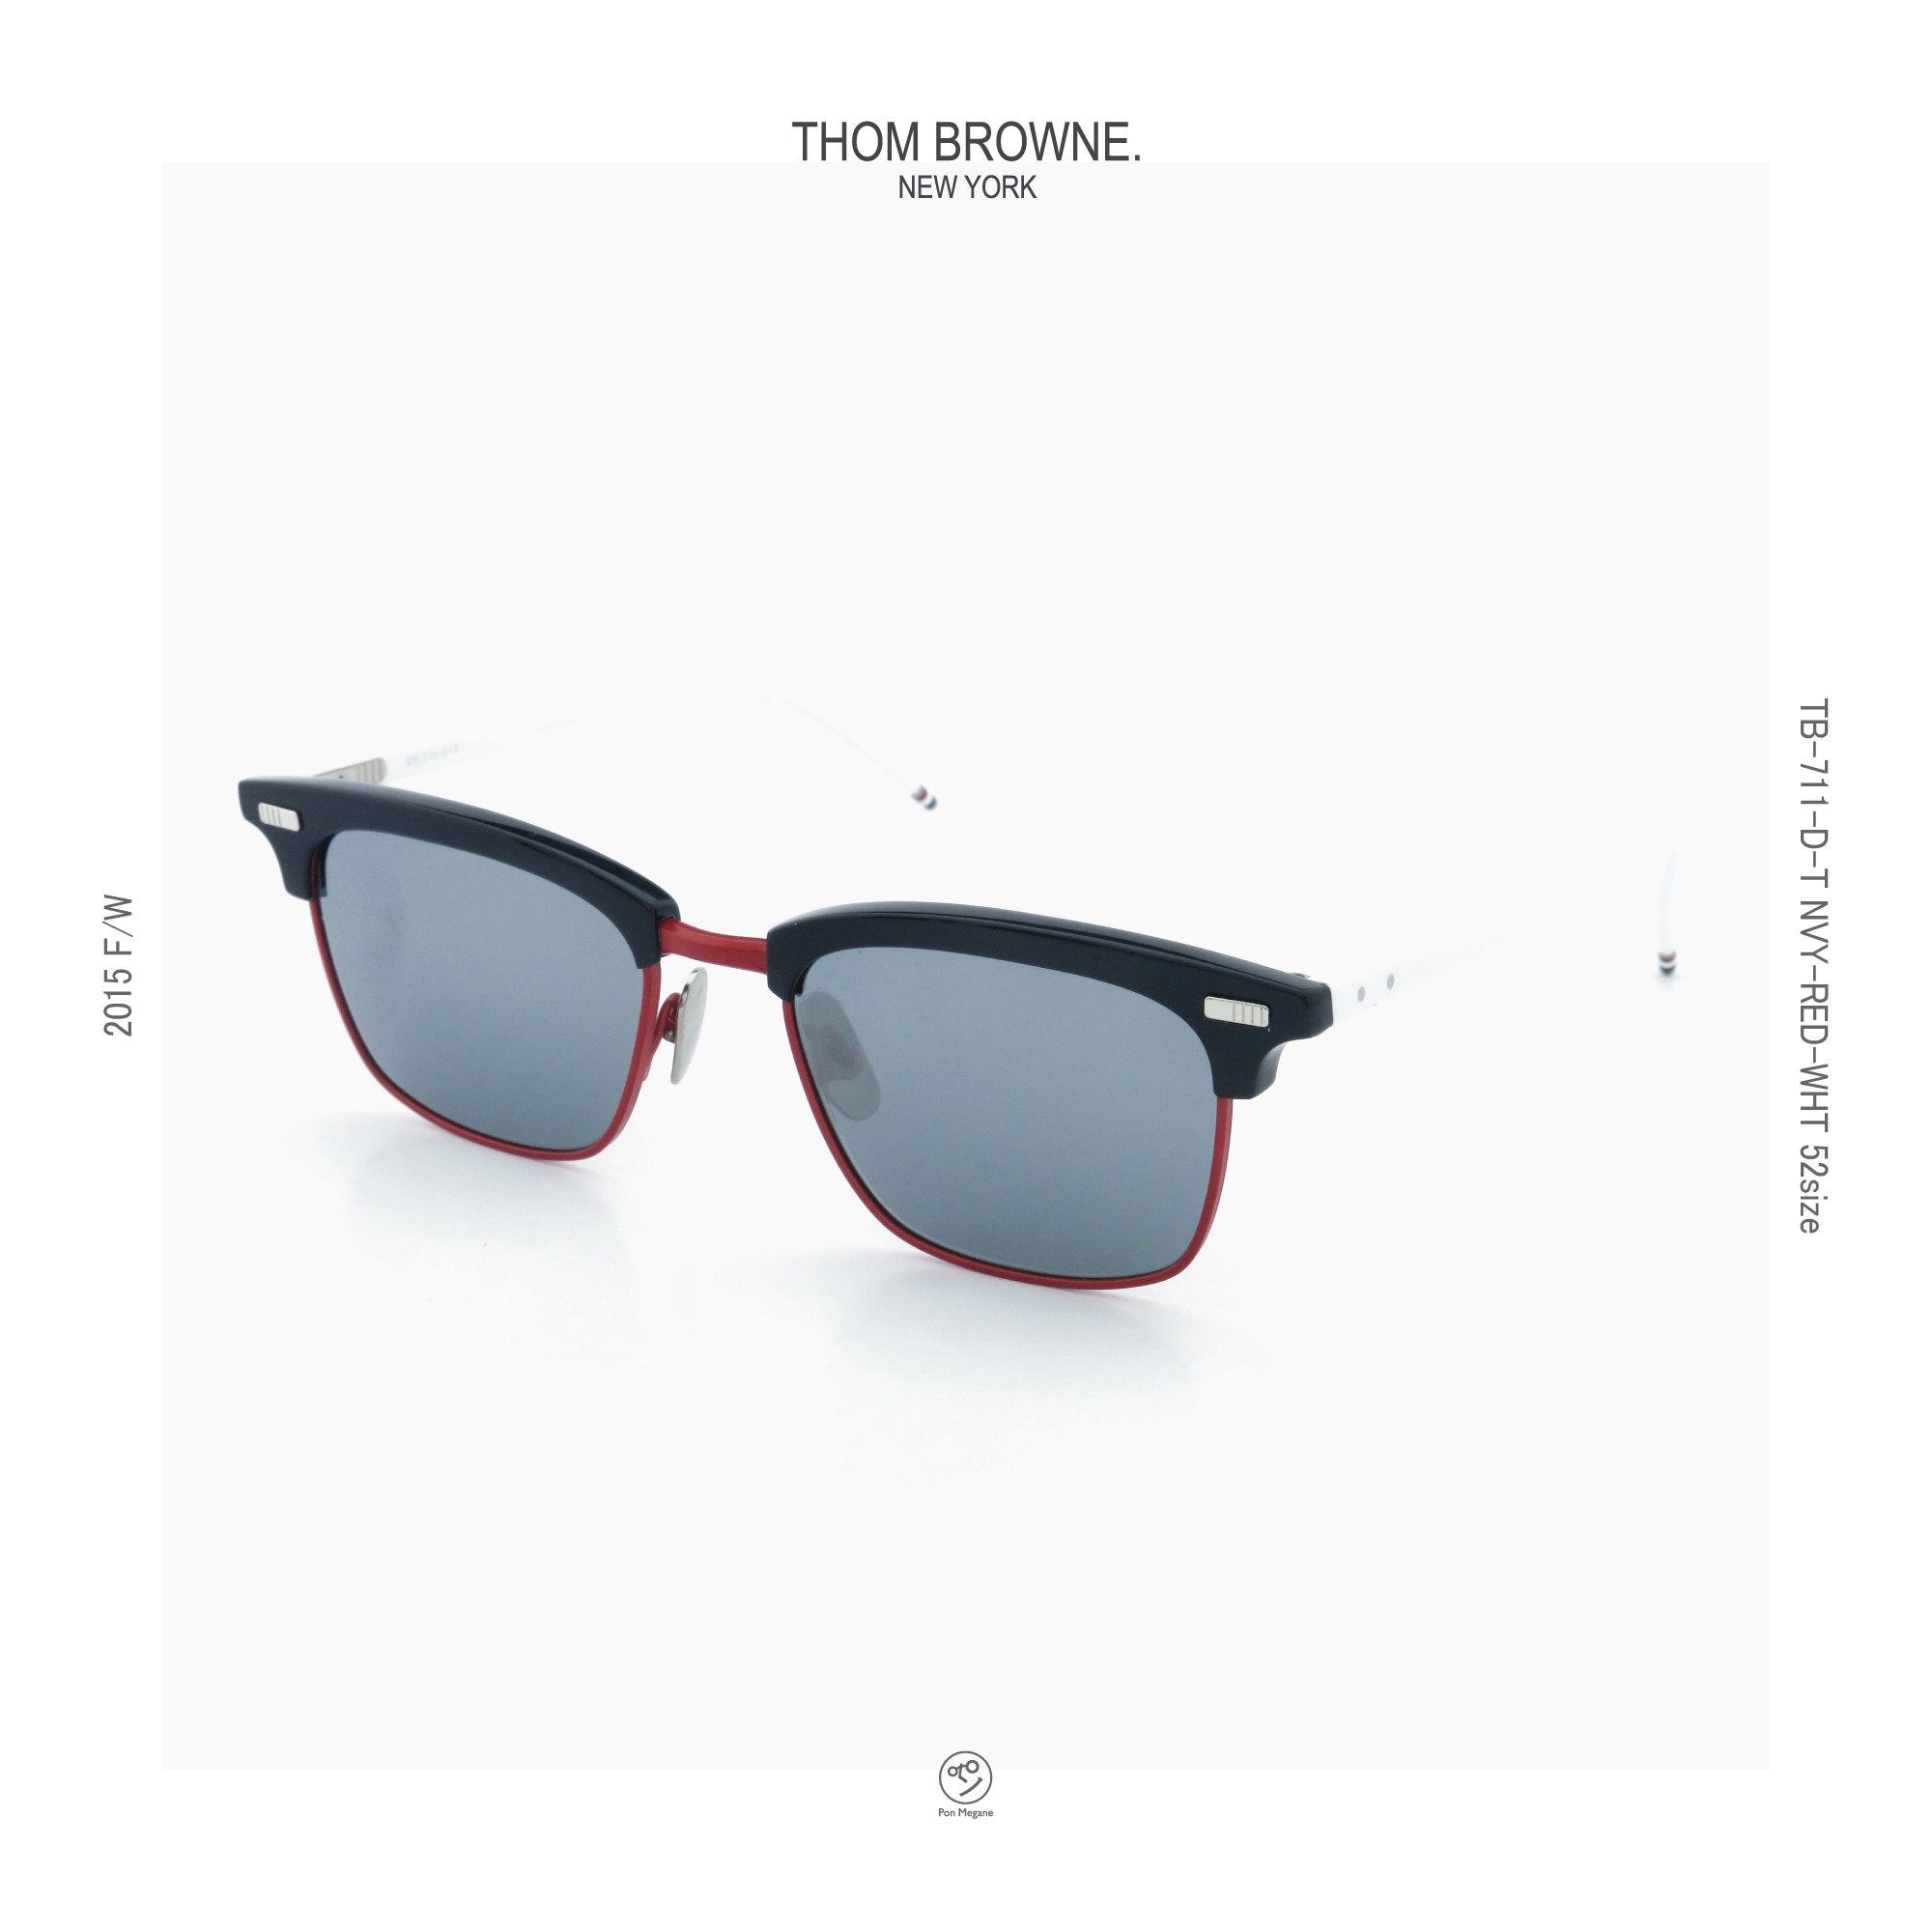 THOM-BROWNE-TB-711-D-T-NVY-RED-WHT-52-DG-SM-insta